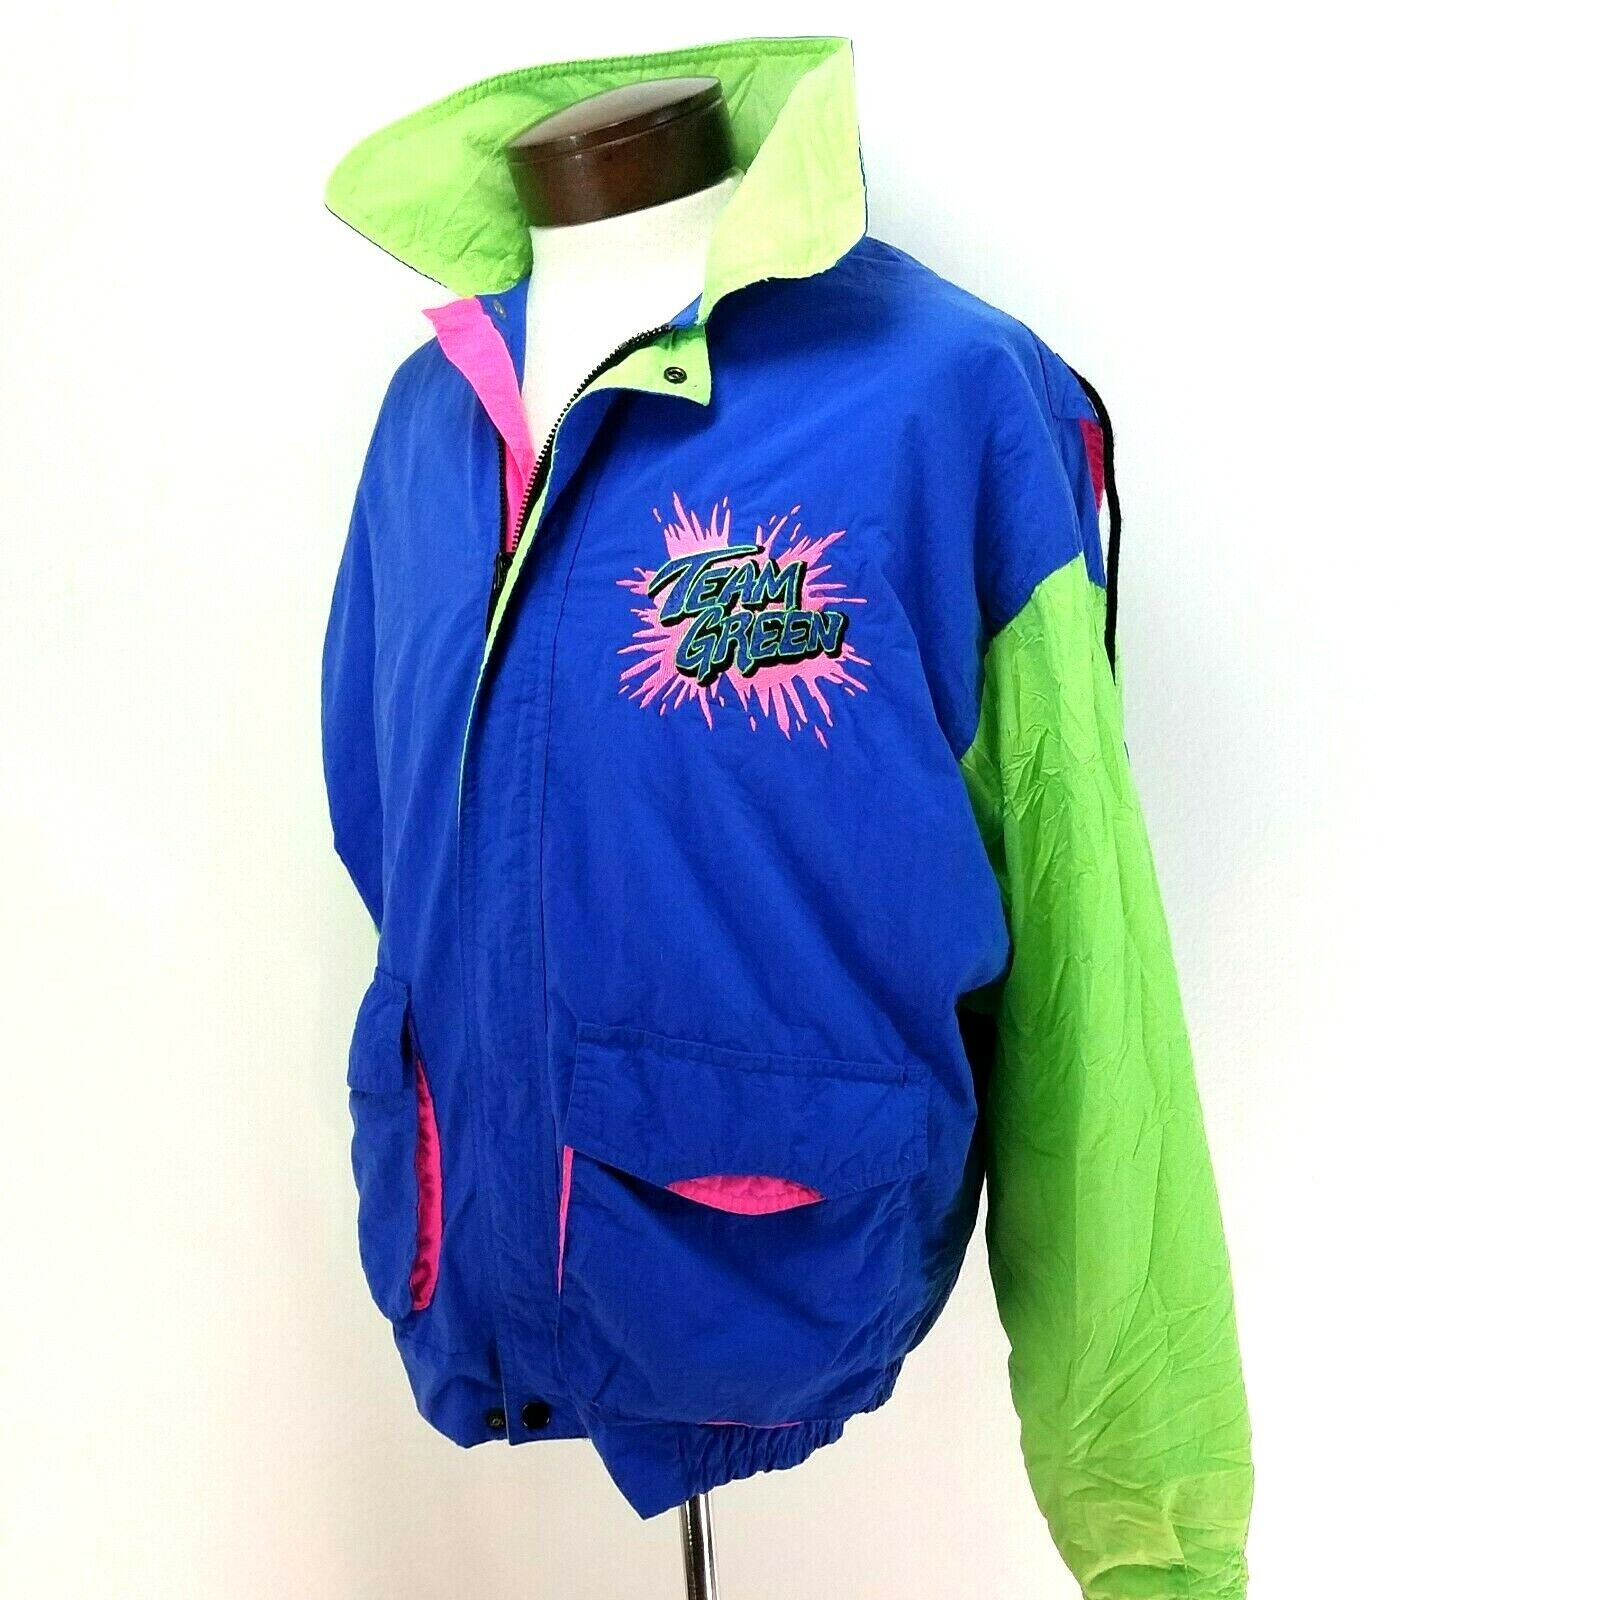 Vtg 90s TEAM GREEN KAWASAKI Jacket Embroidered Zip Up Hooded Men's Fits M  to L *